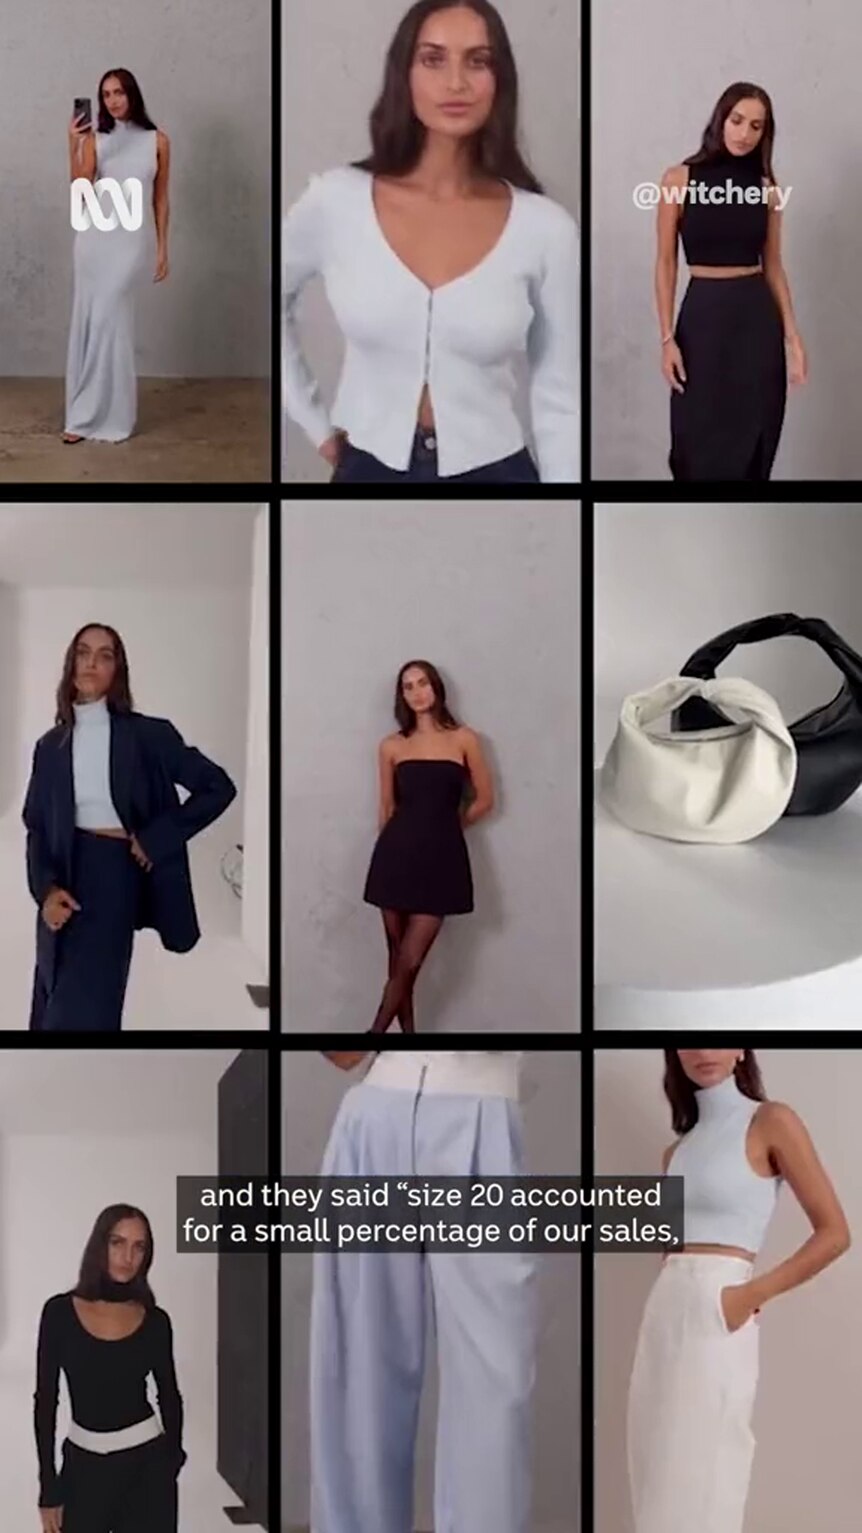 A composite image shows nine pics a selection of fashion items, some modelled on women 